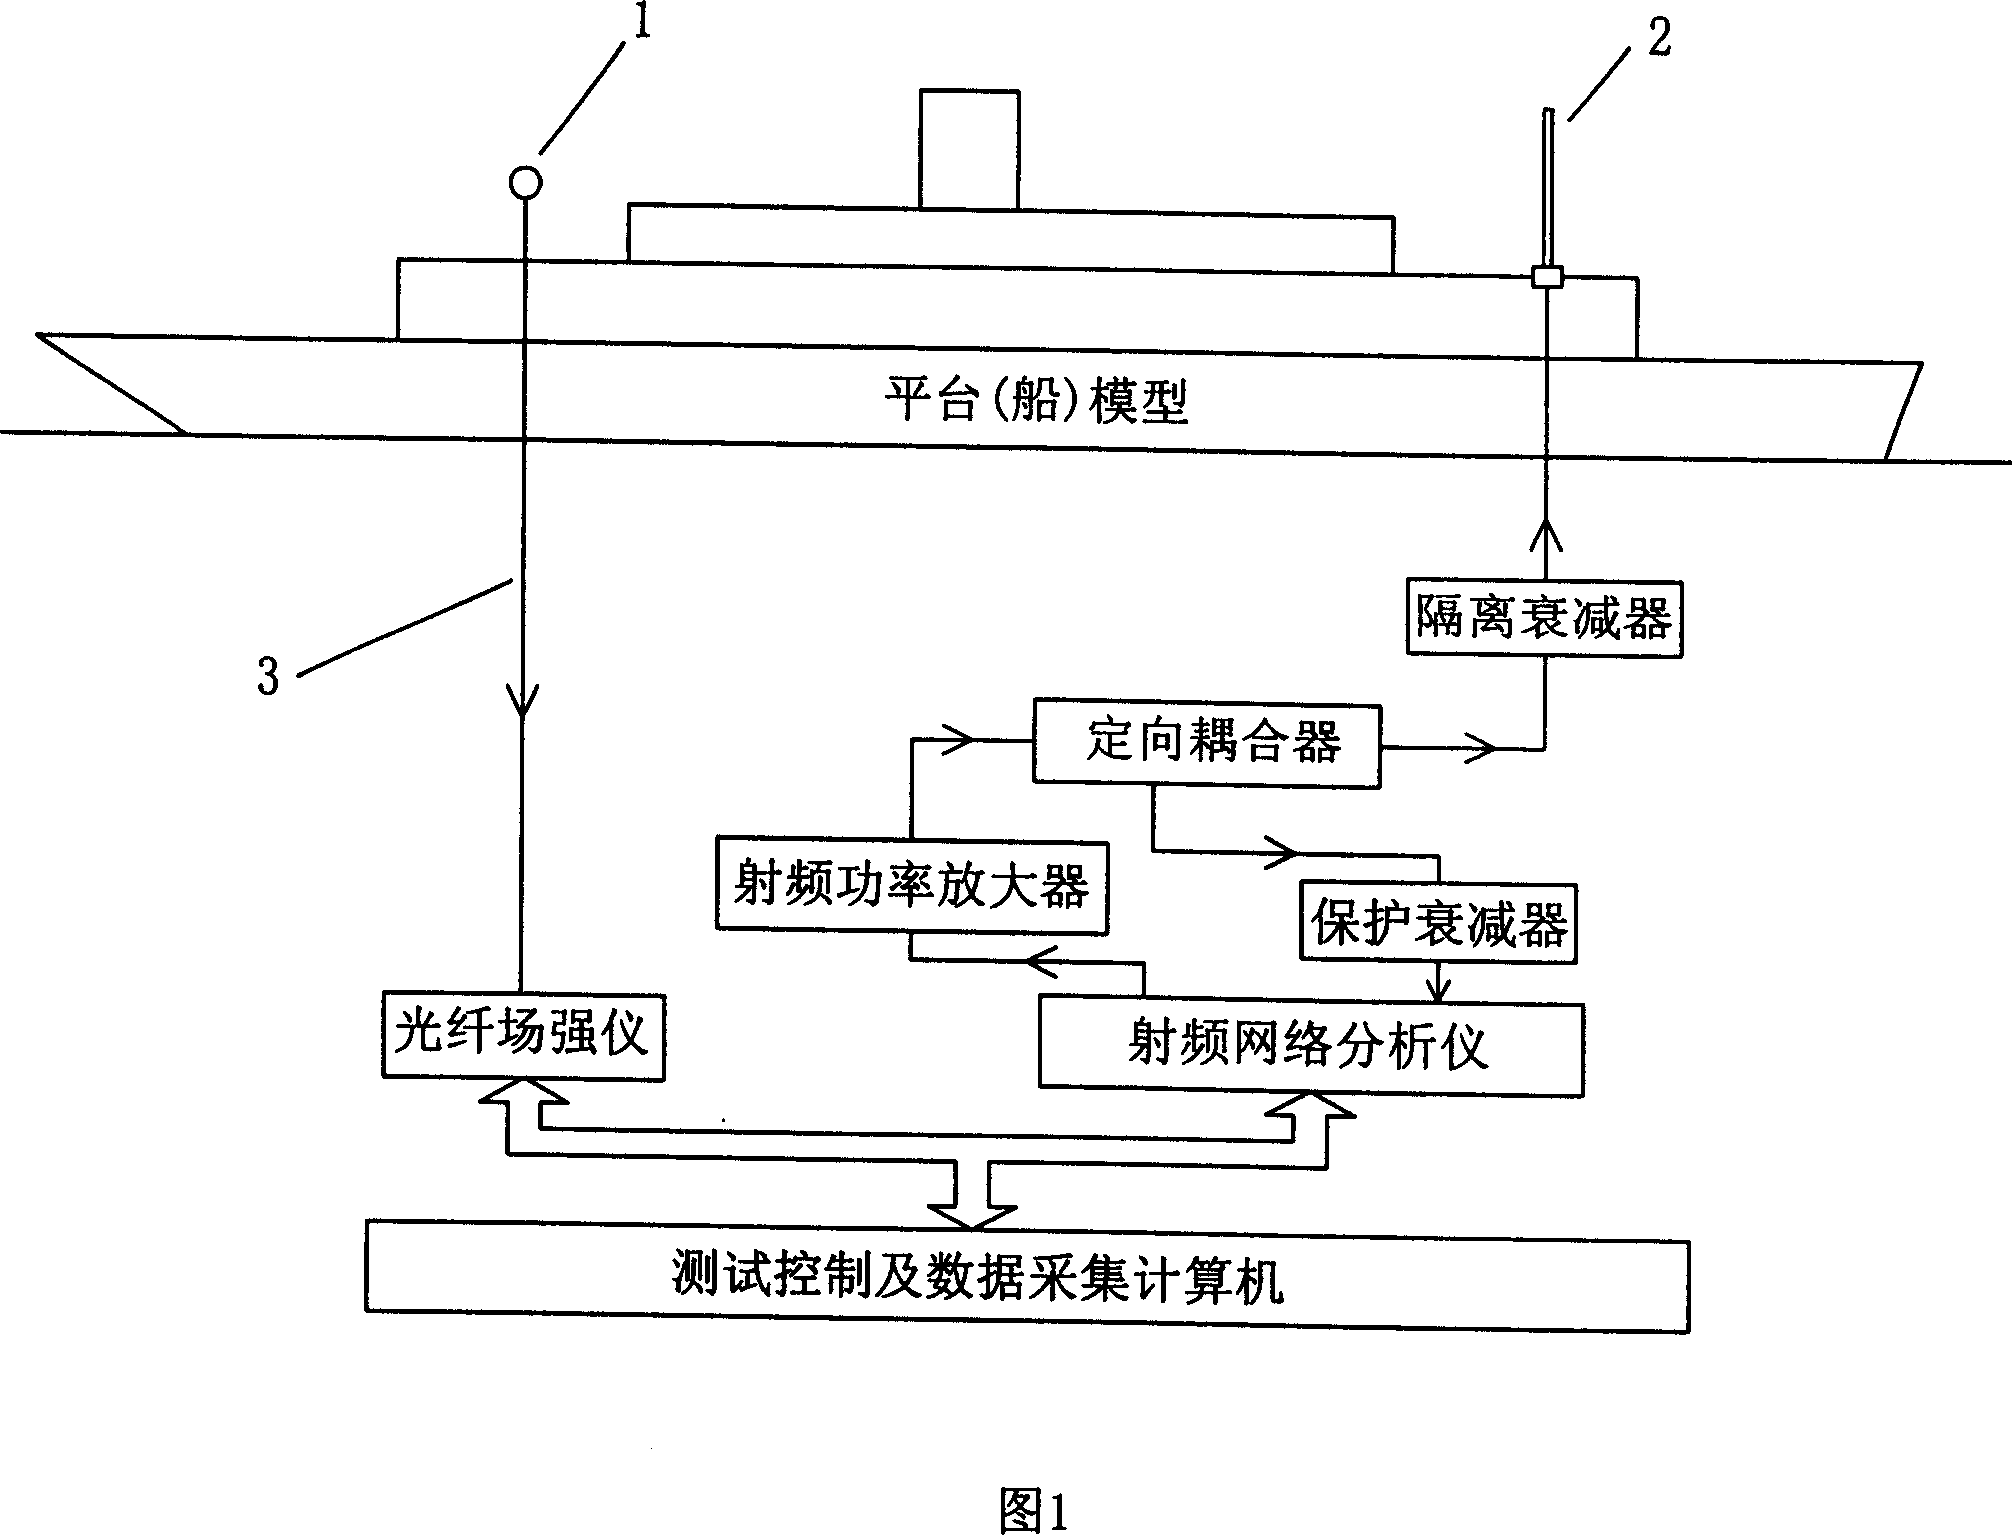 Predicted testing system of radiation field strength mode of short wave antenna